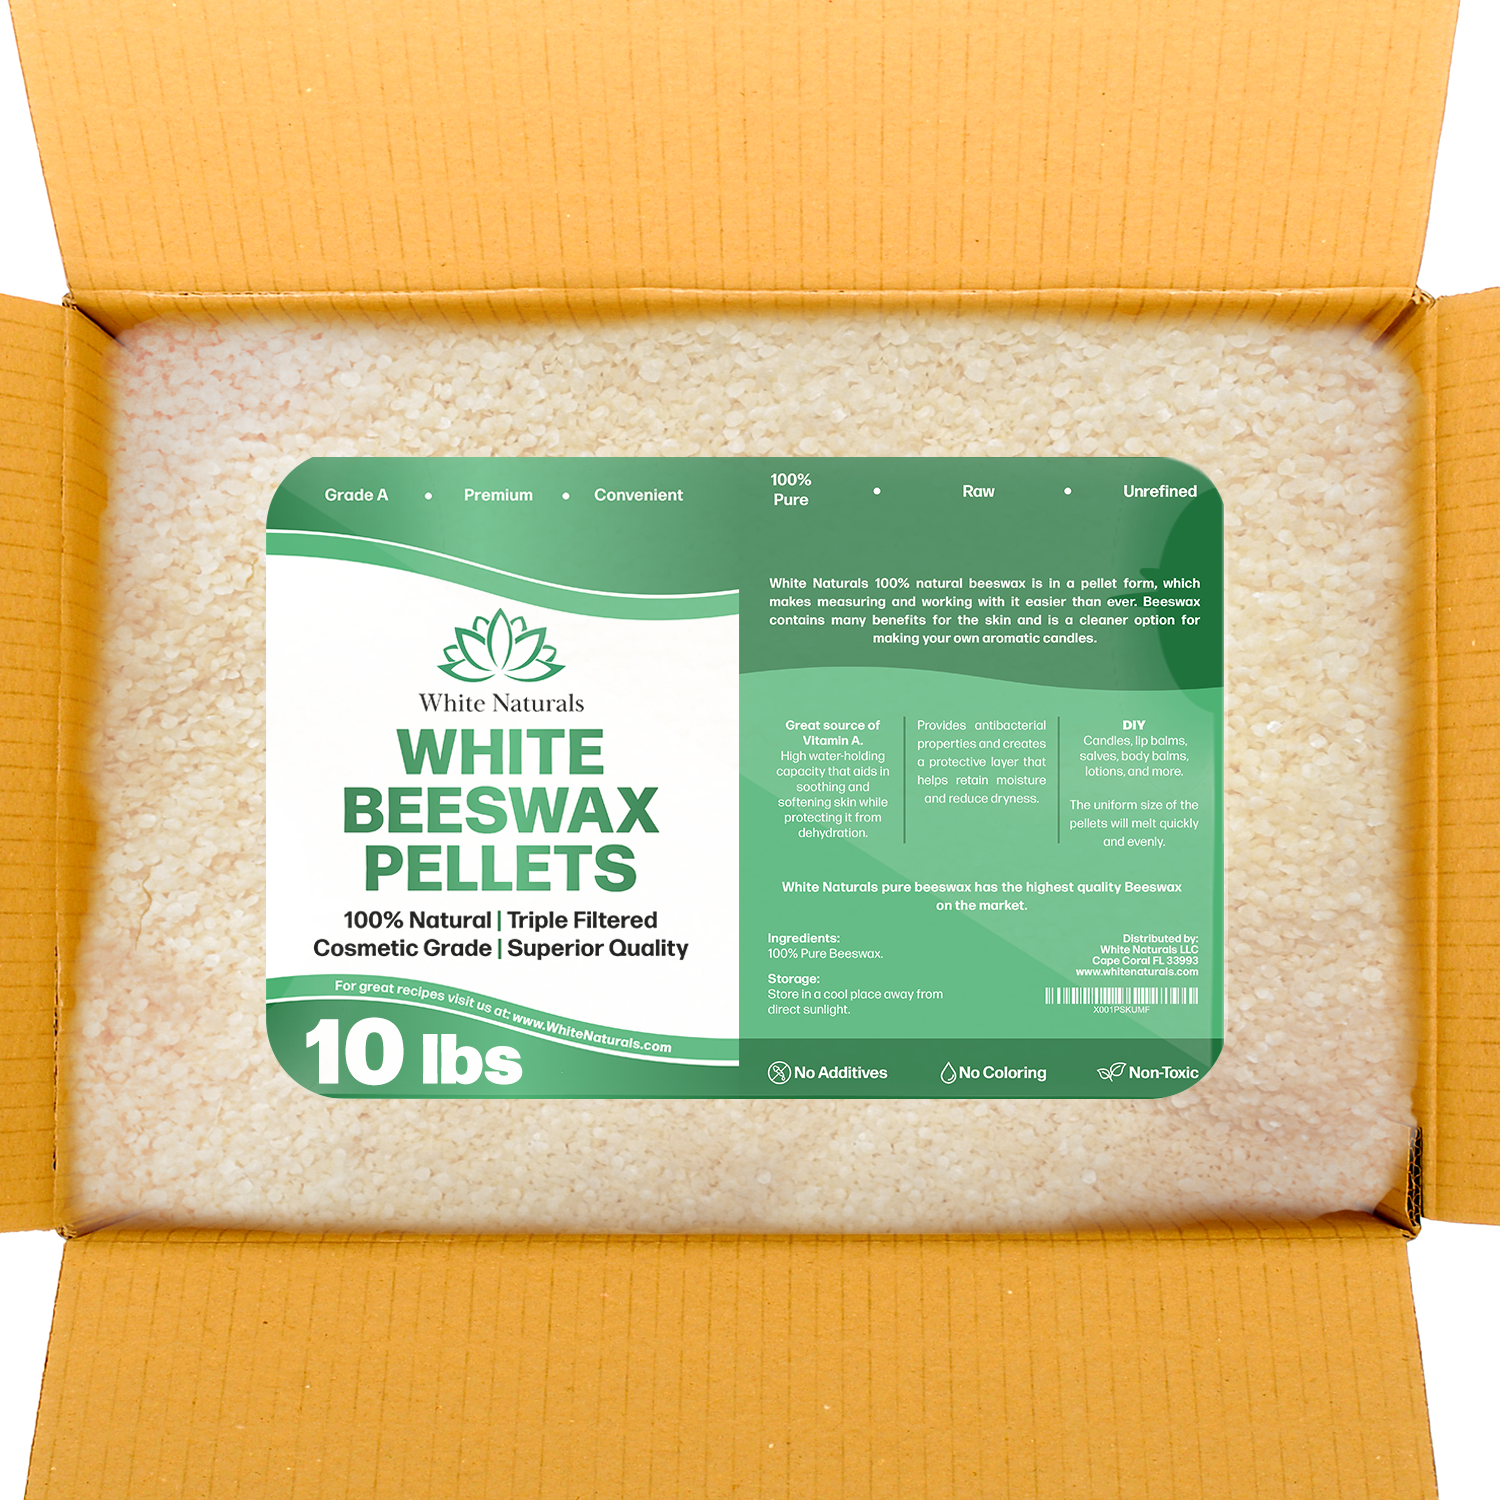 Stakich 2-lb Pure White Beeswax Pellets - Cosmetic Grade…